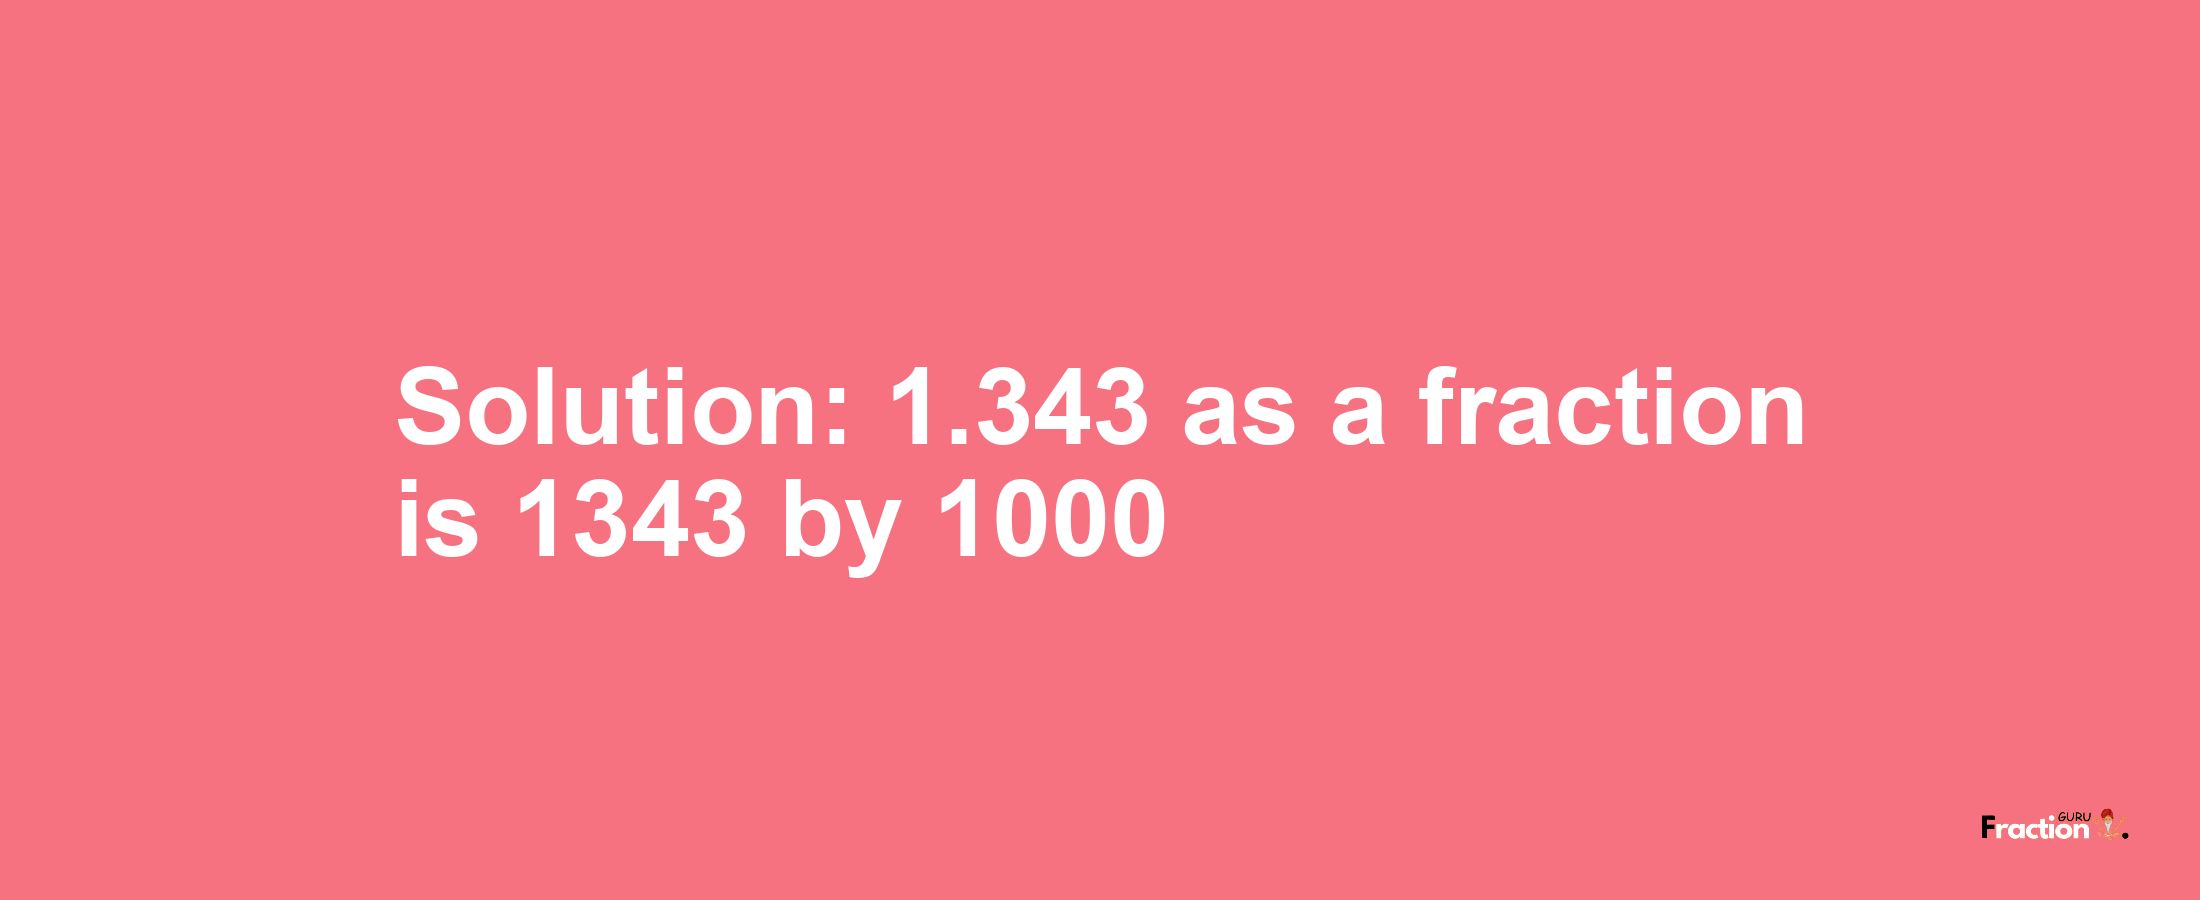 Solution:1.343 as a fraction is 1343/1000